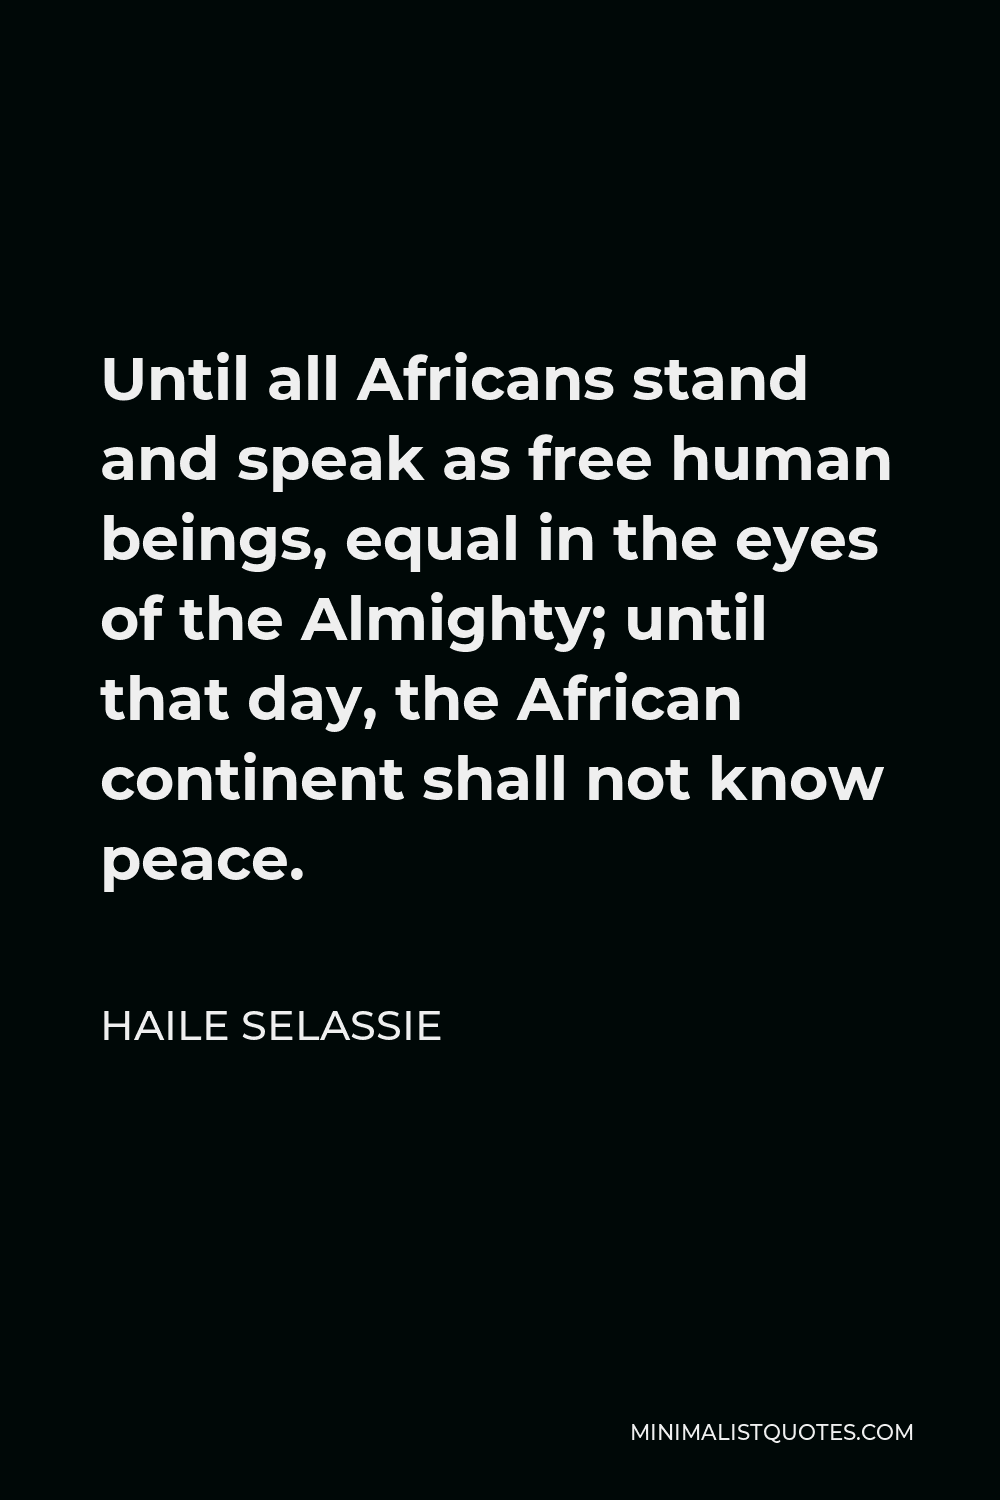 Haile Selassie Quote - Until all Africans stand and speak as free human beings, equal in the eyes of the Almighty; until that day, the African continent shall not know peace.